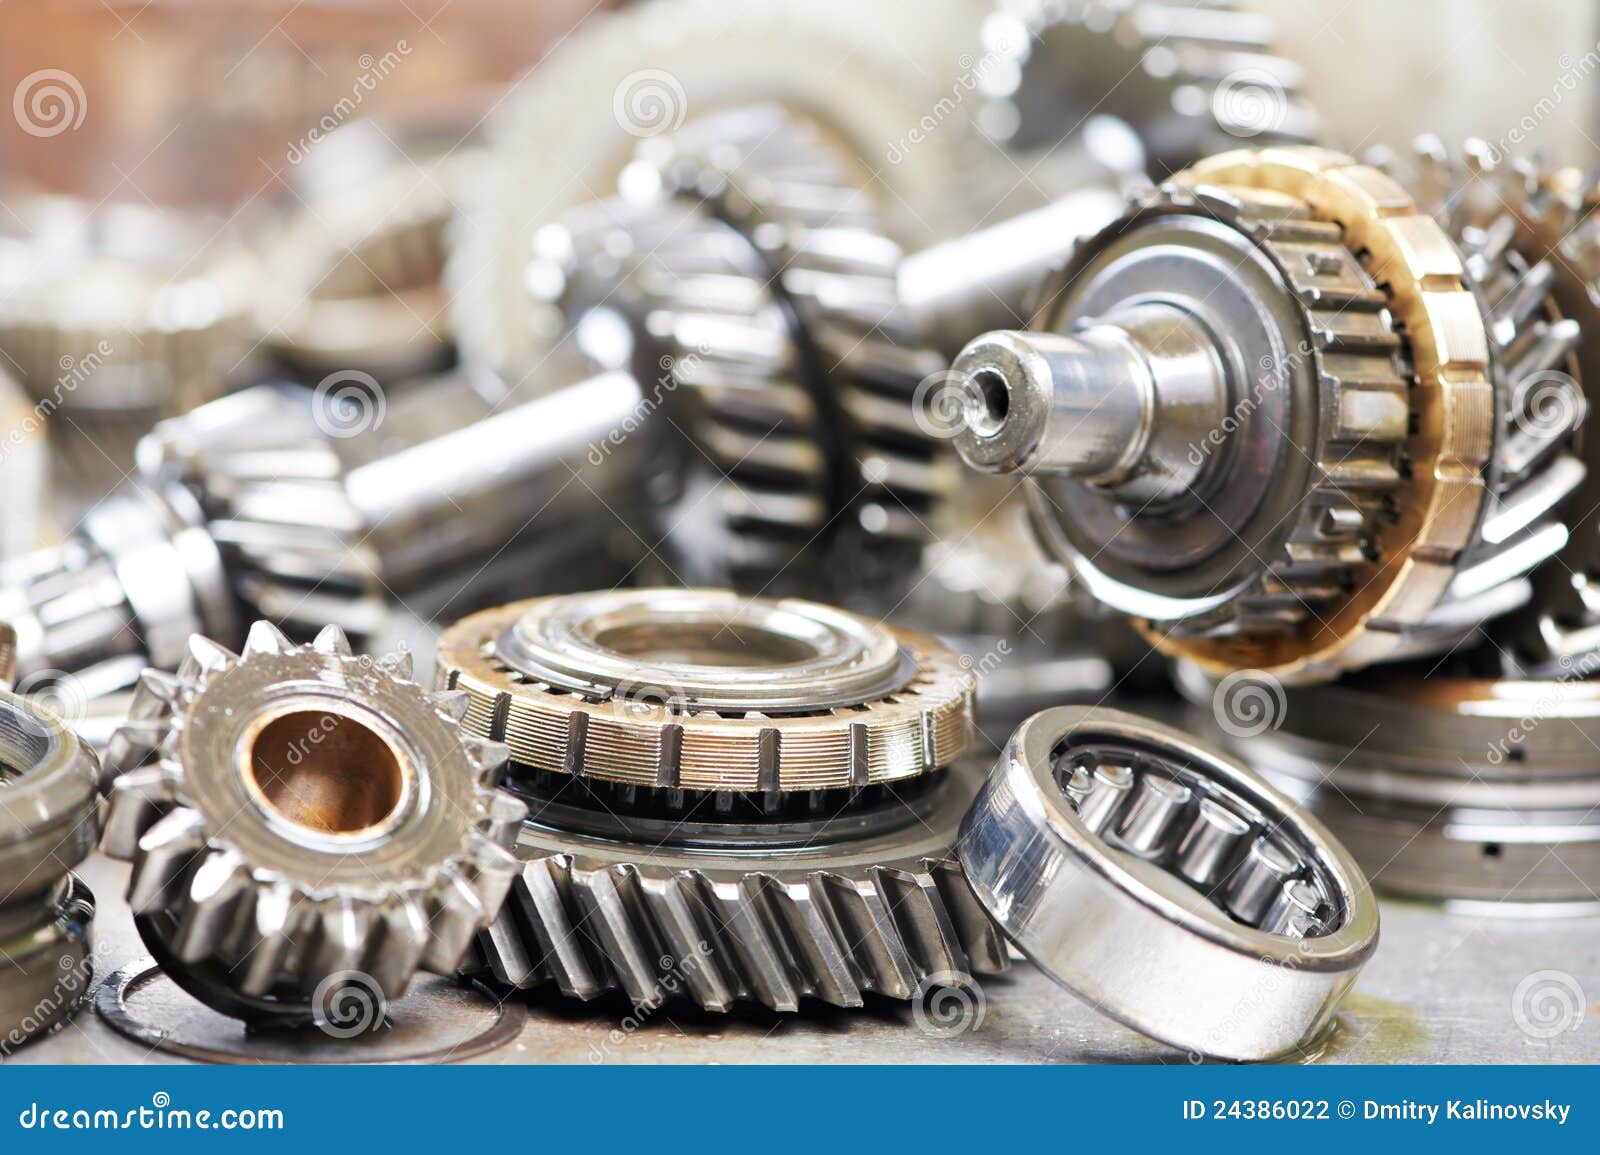 close-up of automobile engine gears